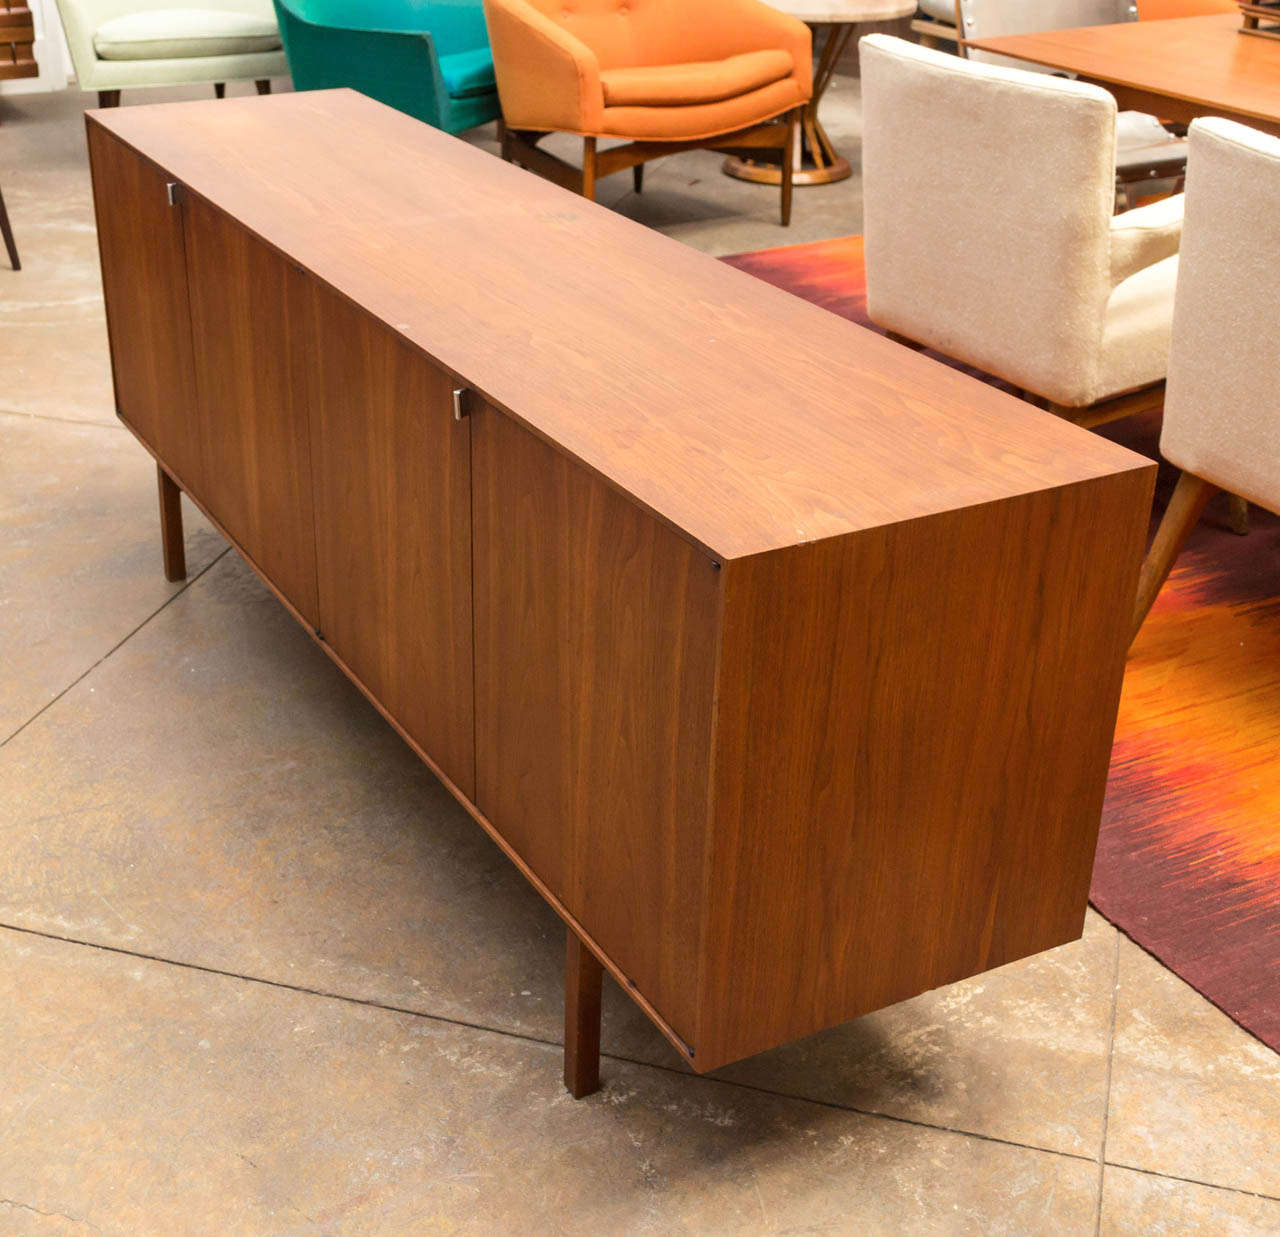 A low wooden credenza (Style # 541) by Florence Knoll. Four cabinets, which open up to two large cubbies of maple (adjustable shelves included), left side with slide out drawers. Chromed pulls. Part of the Original production run with wood legs.